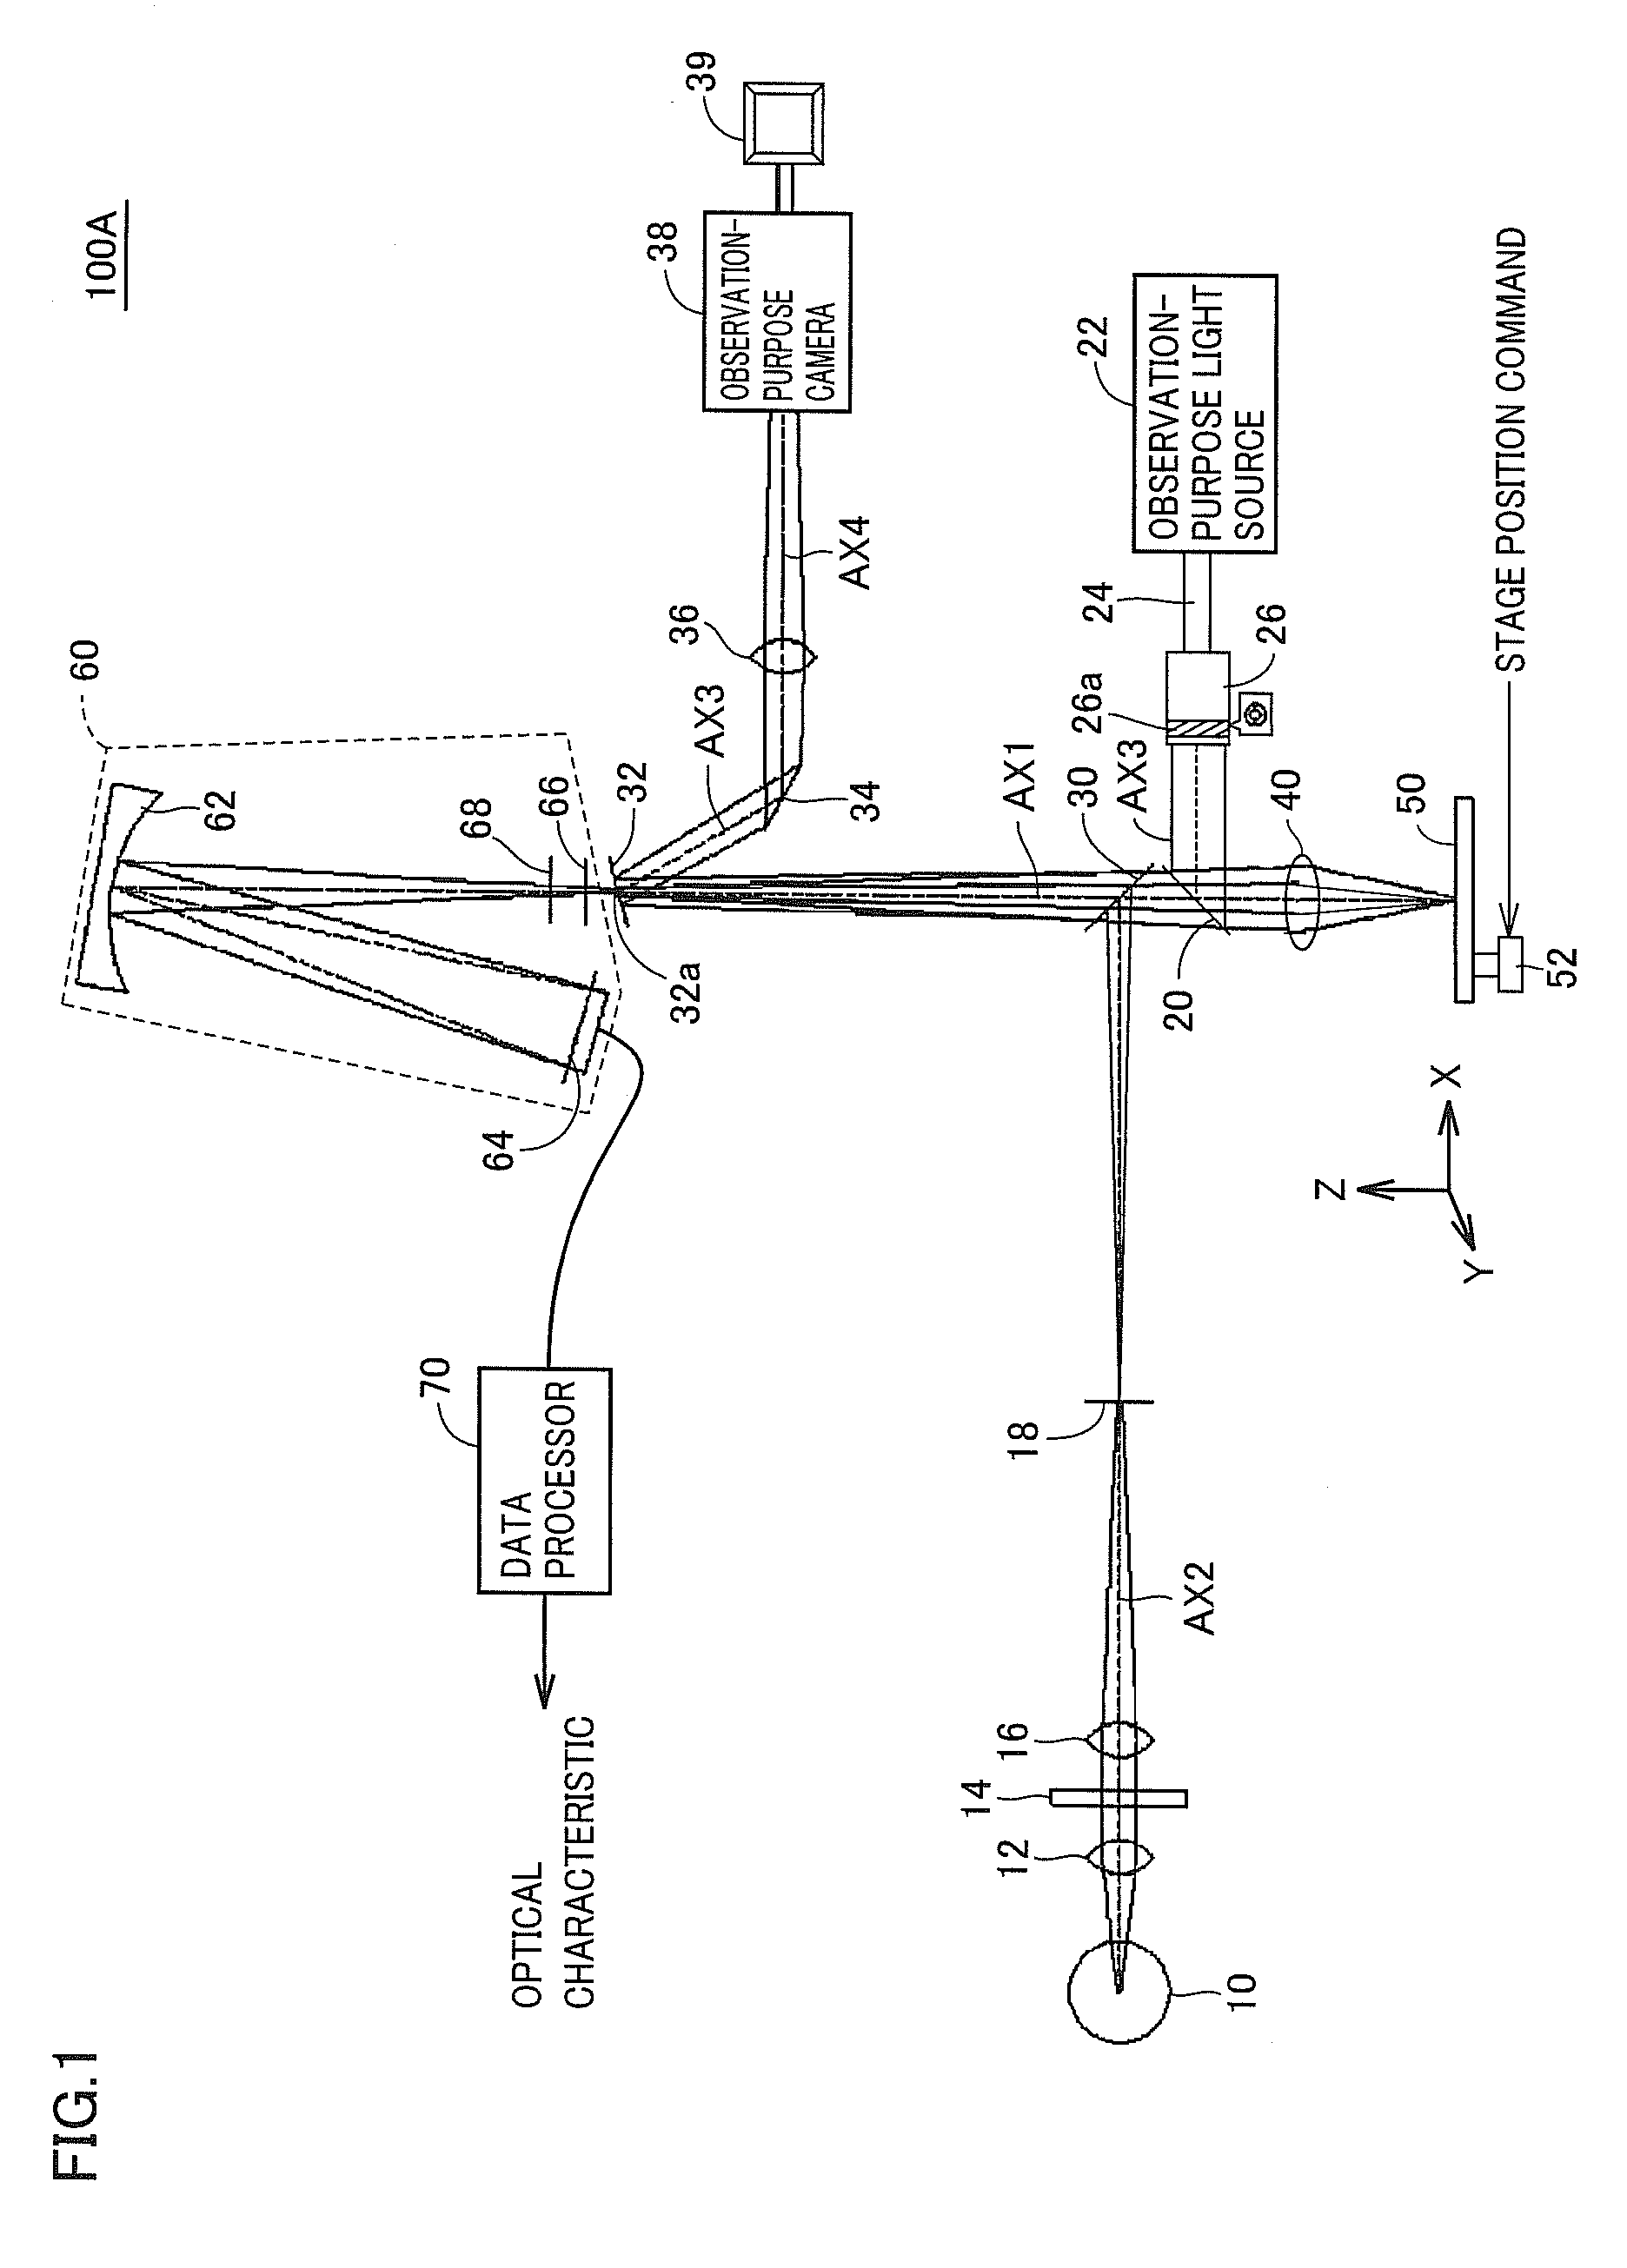 Optical characteristic measuring apparatus and measuring method using light reflected from object to be measured